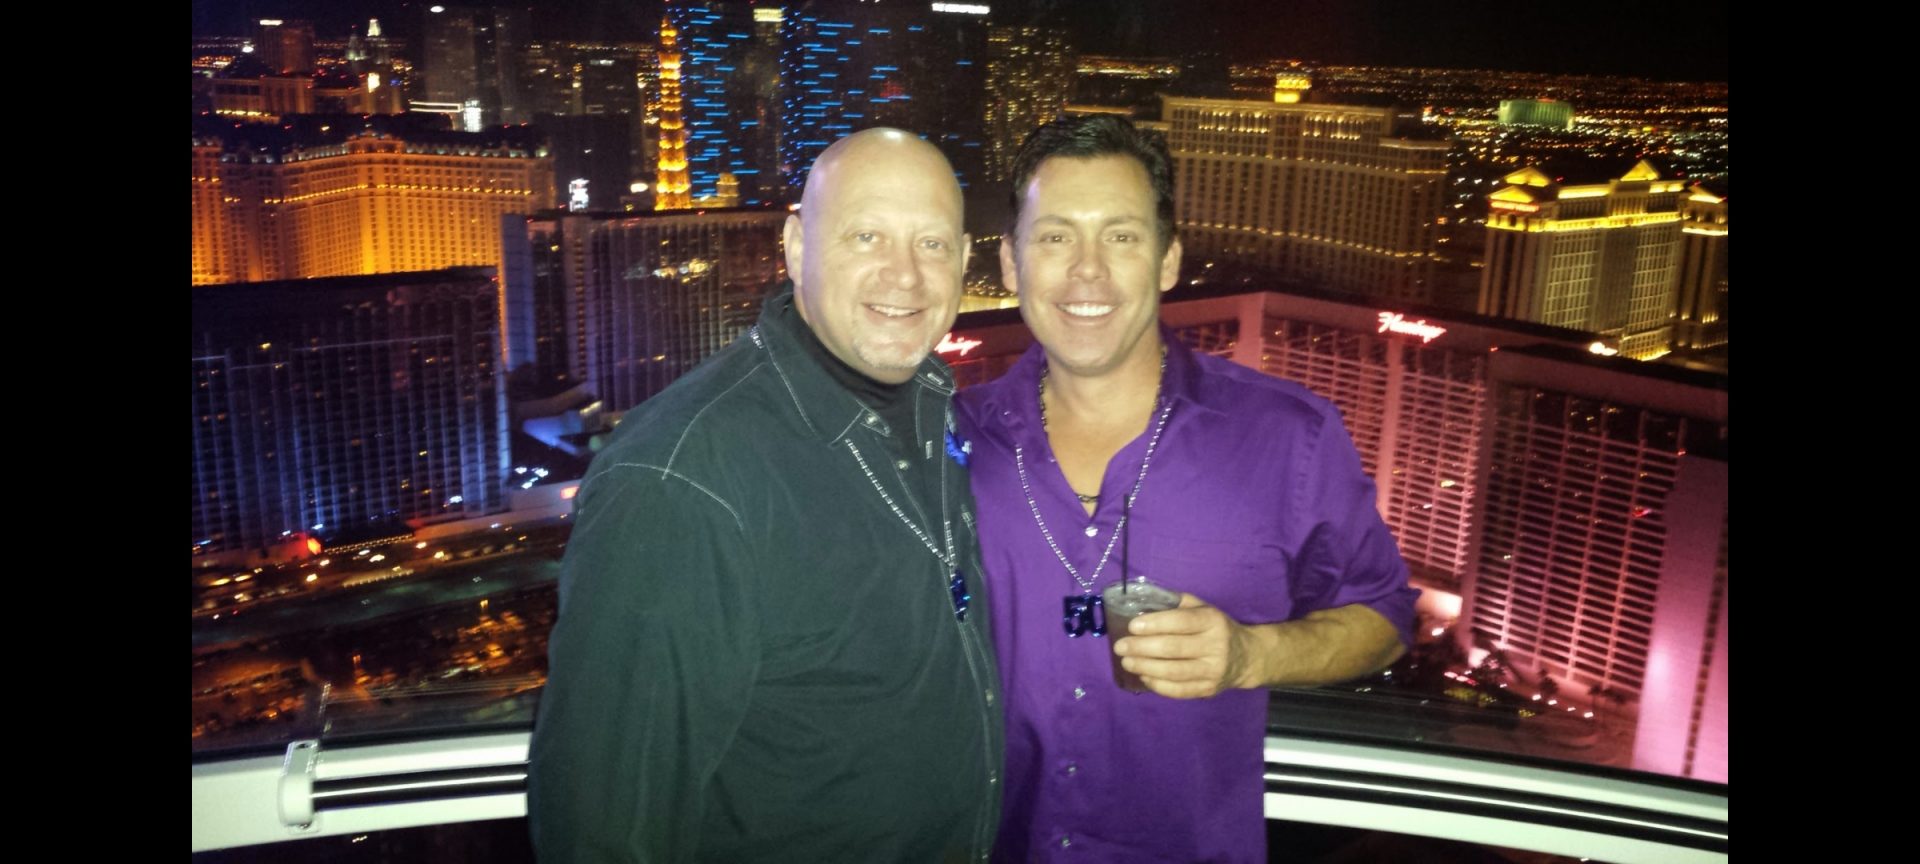 This was such a fabulous weekend celebrating our 50th Bdays together in Vegas! Rest in peace my friend.